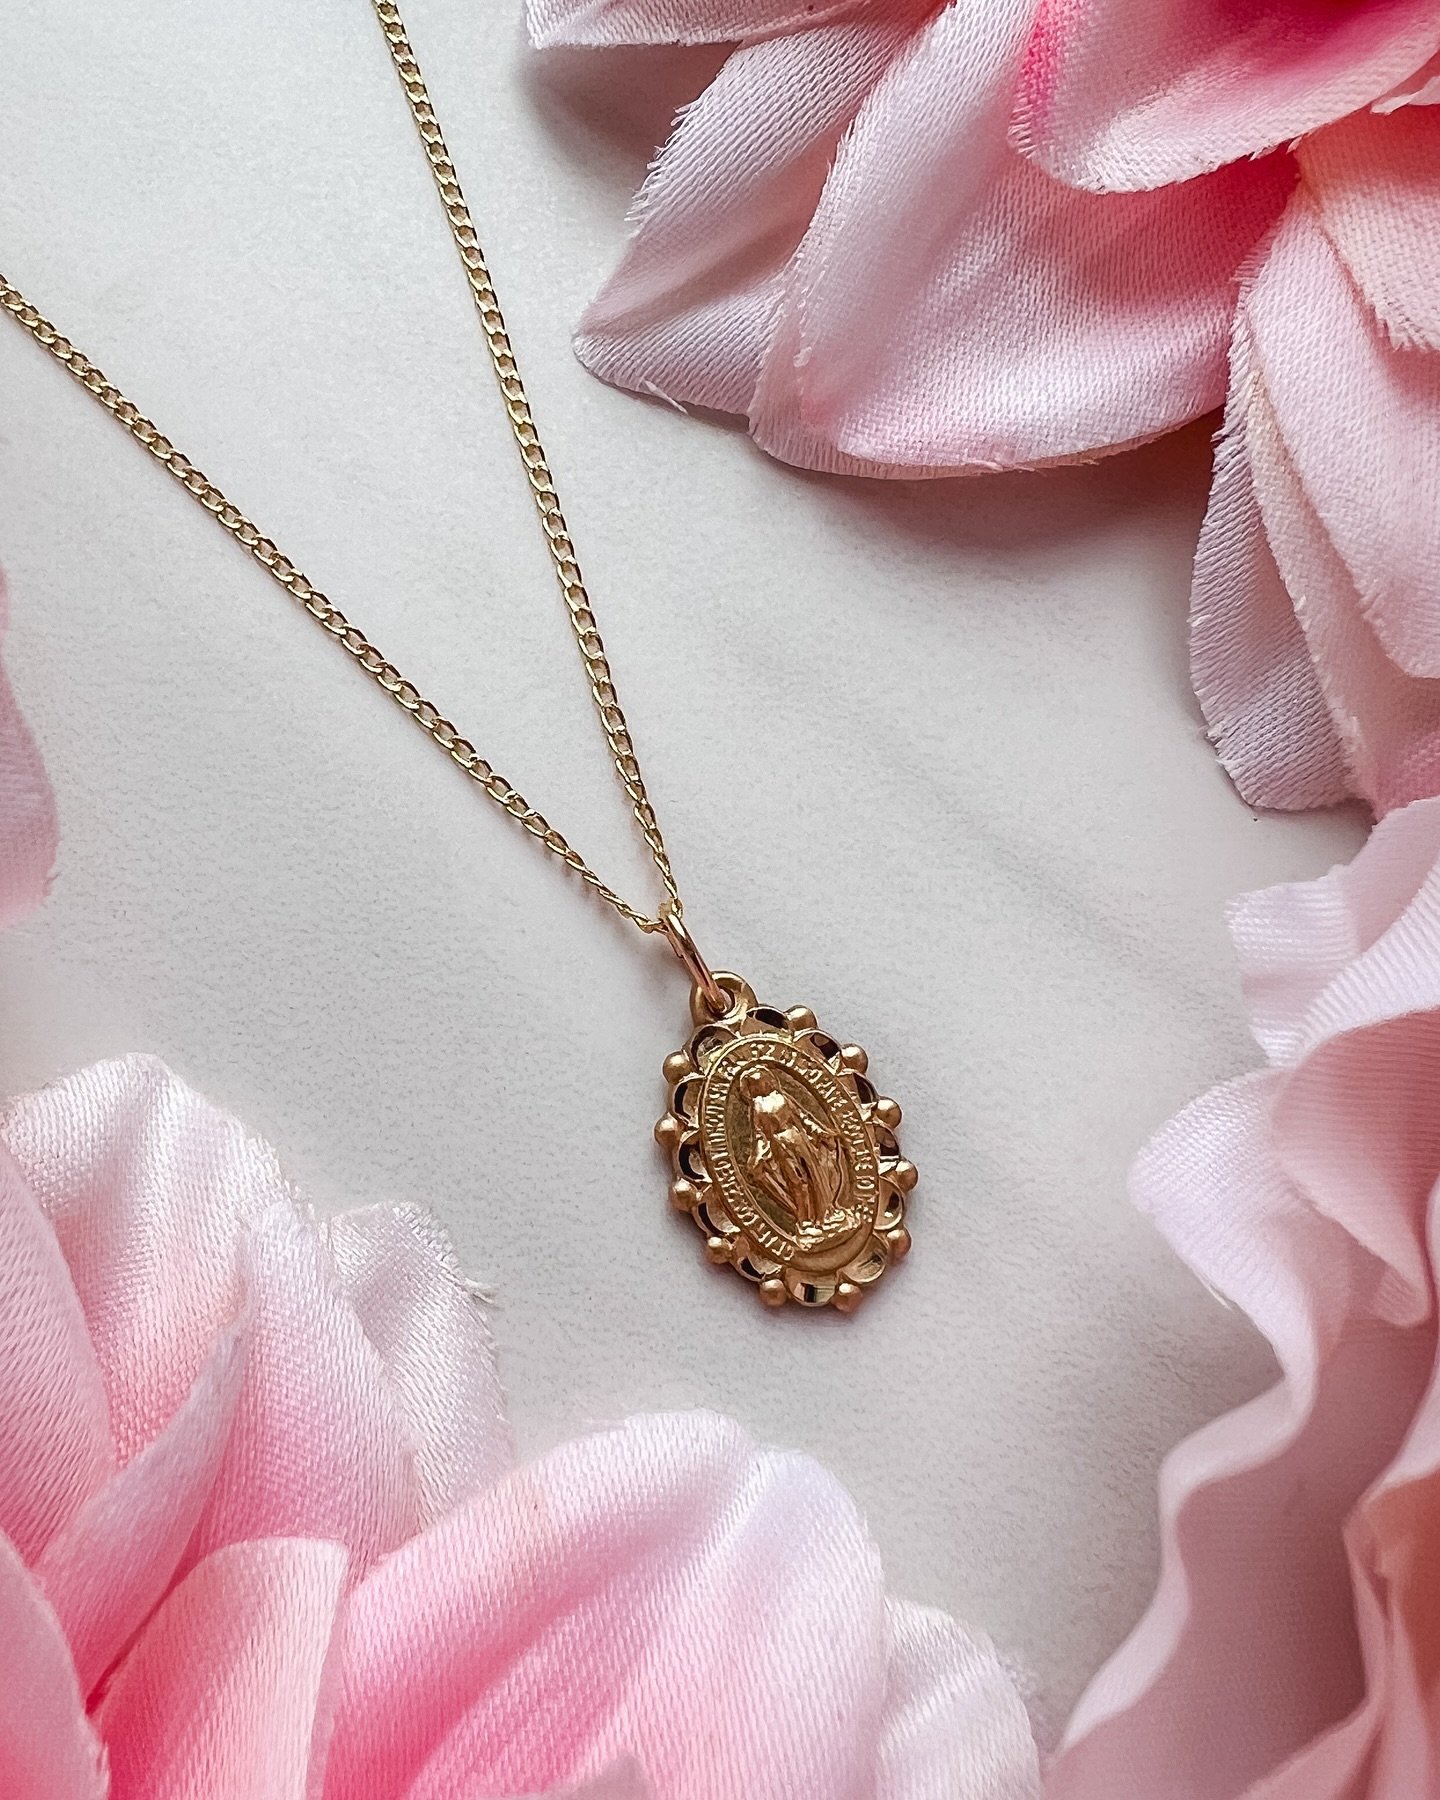 Petite Miraculous Medal Necklace 🩷

This beauty is available in 14k gold, gold filled, and sterling silver. It&rsquo;s pretty and small and make a lovely gift for all ages. You can find it in our Jewelry section on our website!

We&rsquo;ve been qui